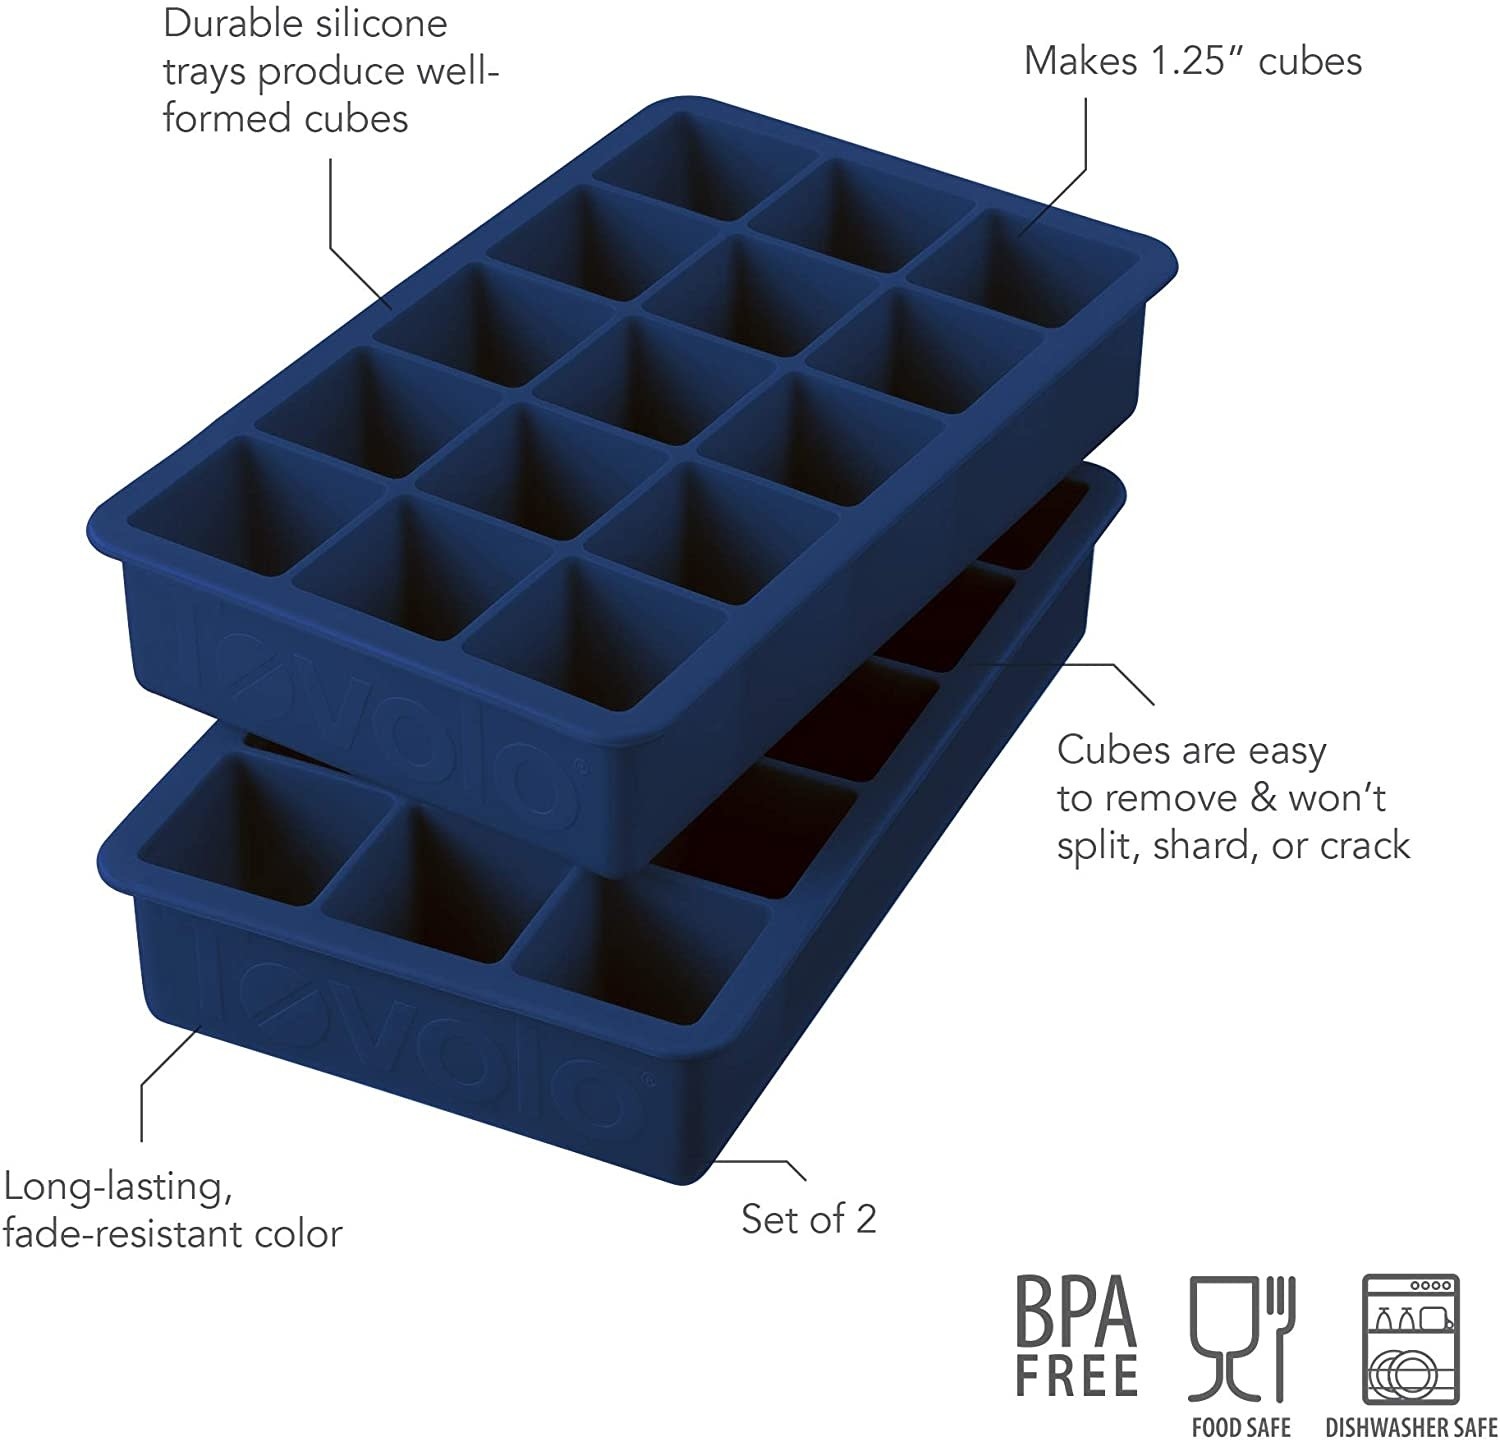 This Best-Selling Ice Cube Tray Doubles as an Organization Solution